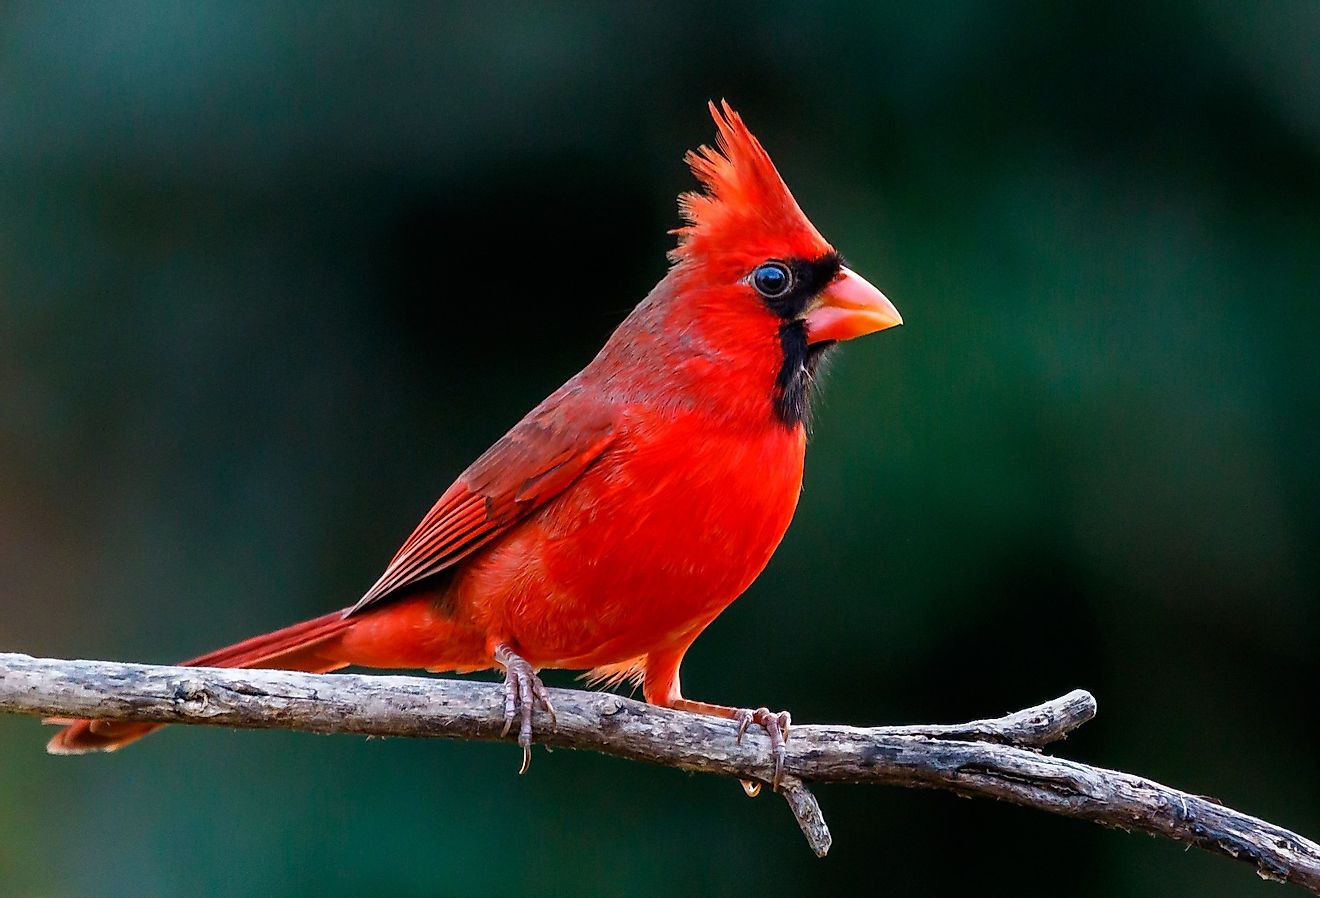 Close-up image of a red Northern Cardinal sitting on a branch.